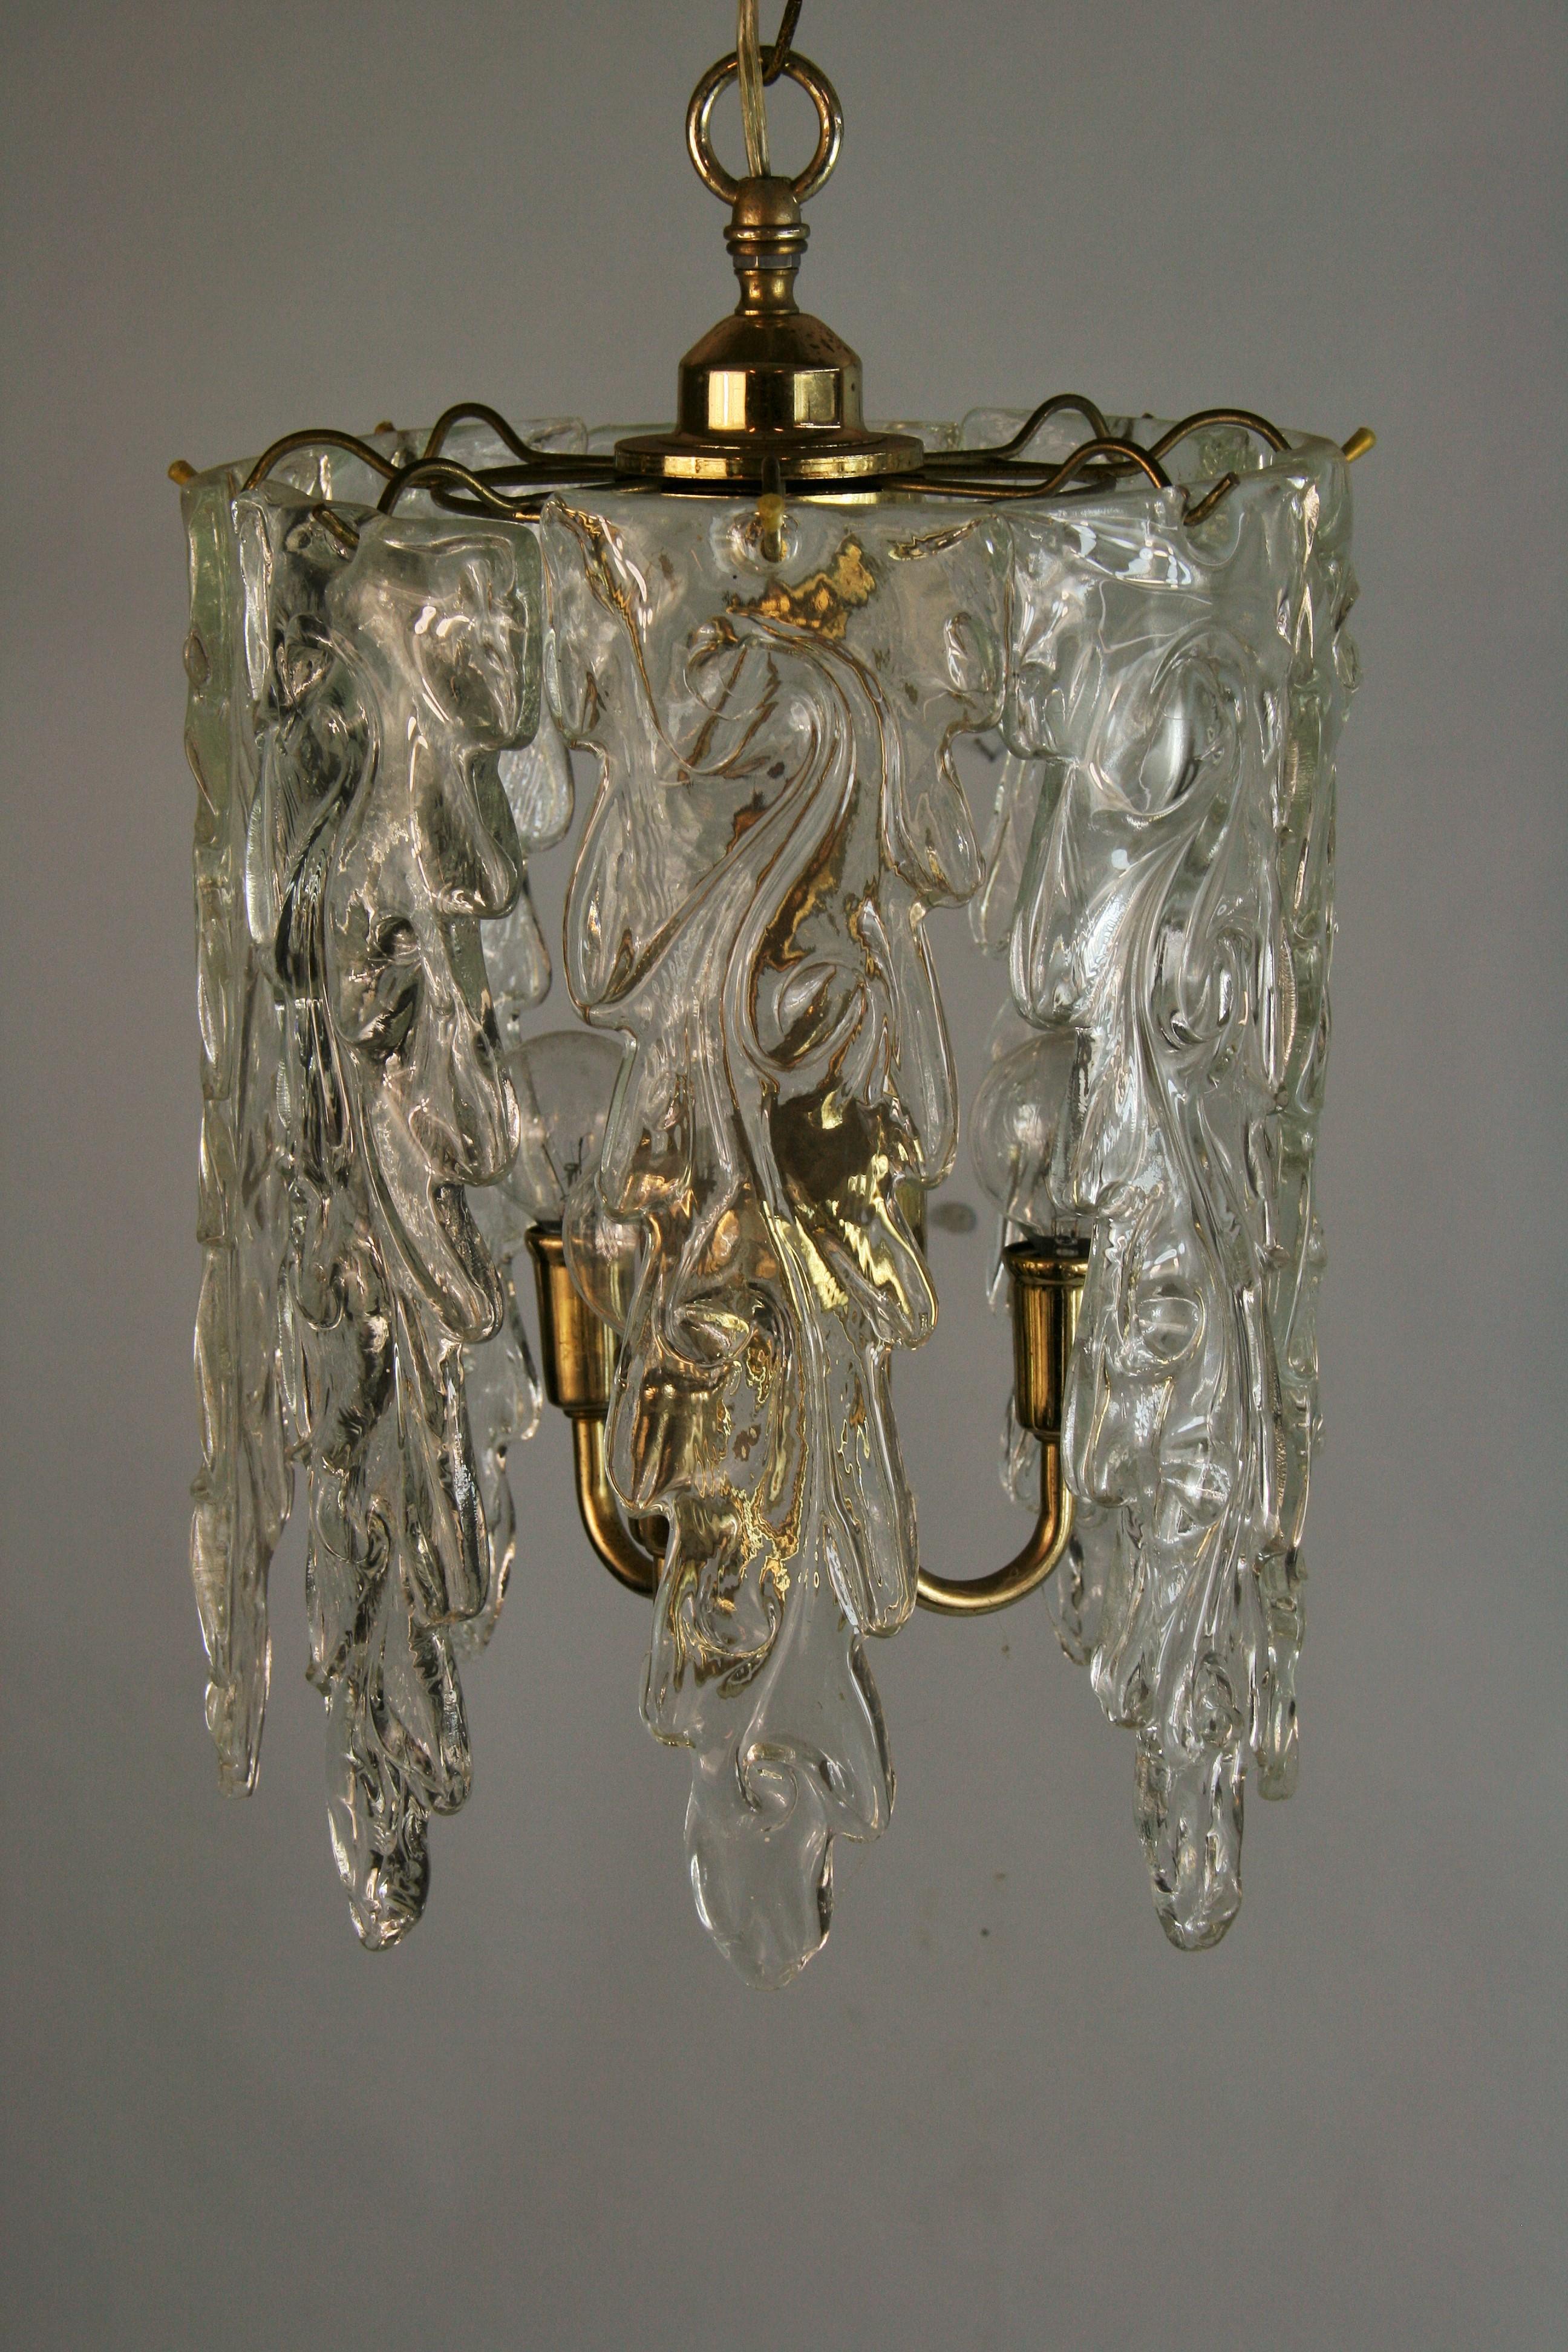 1615 Murano art   glass and brass waterfall chandelier
With 3 internal light cluster
Rewired